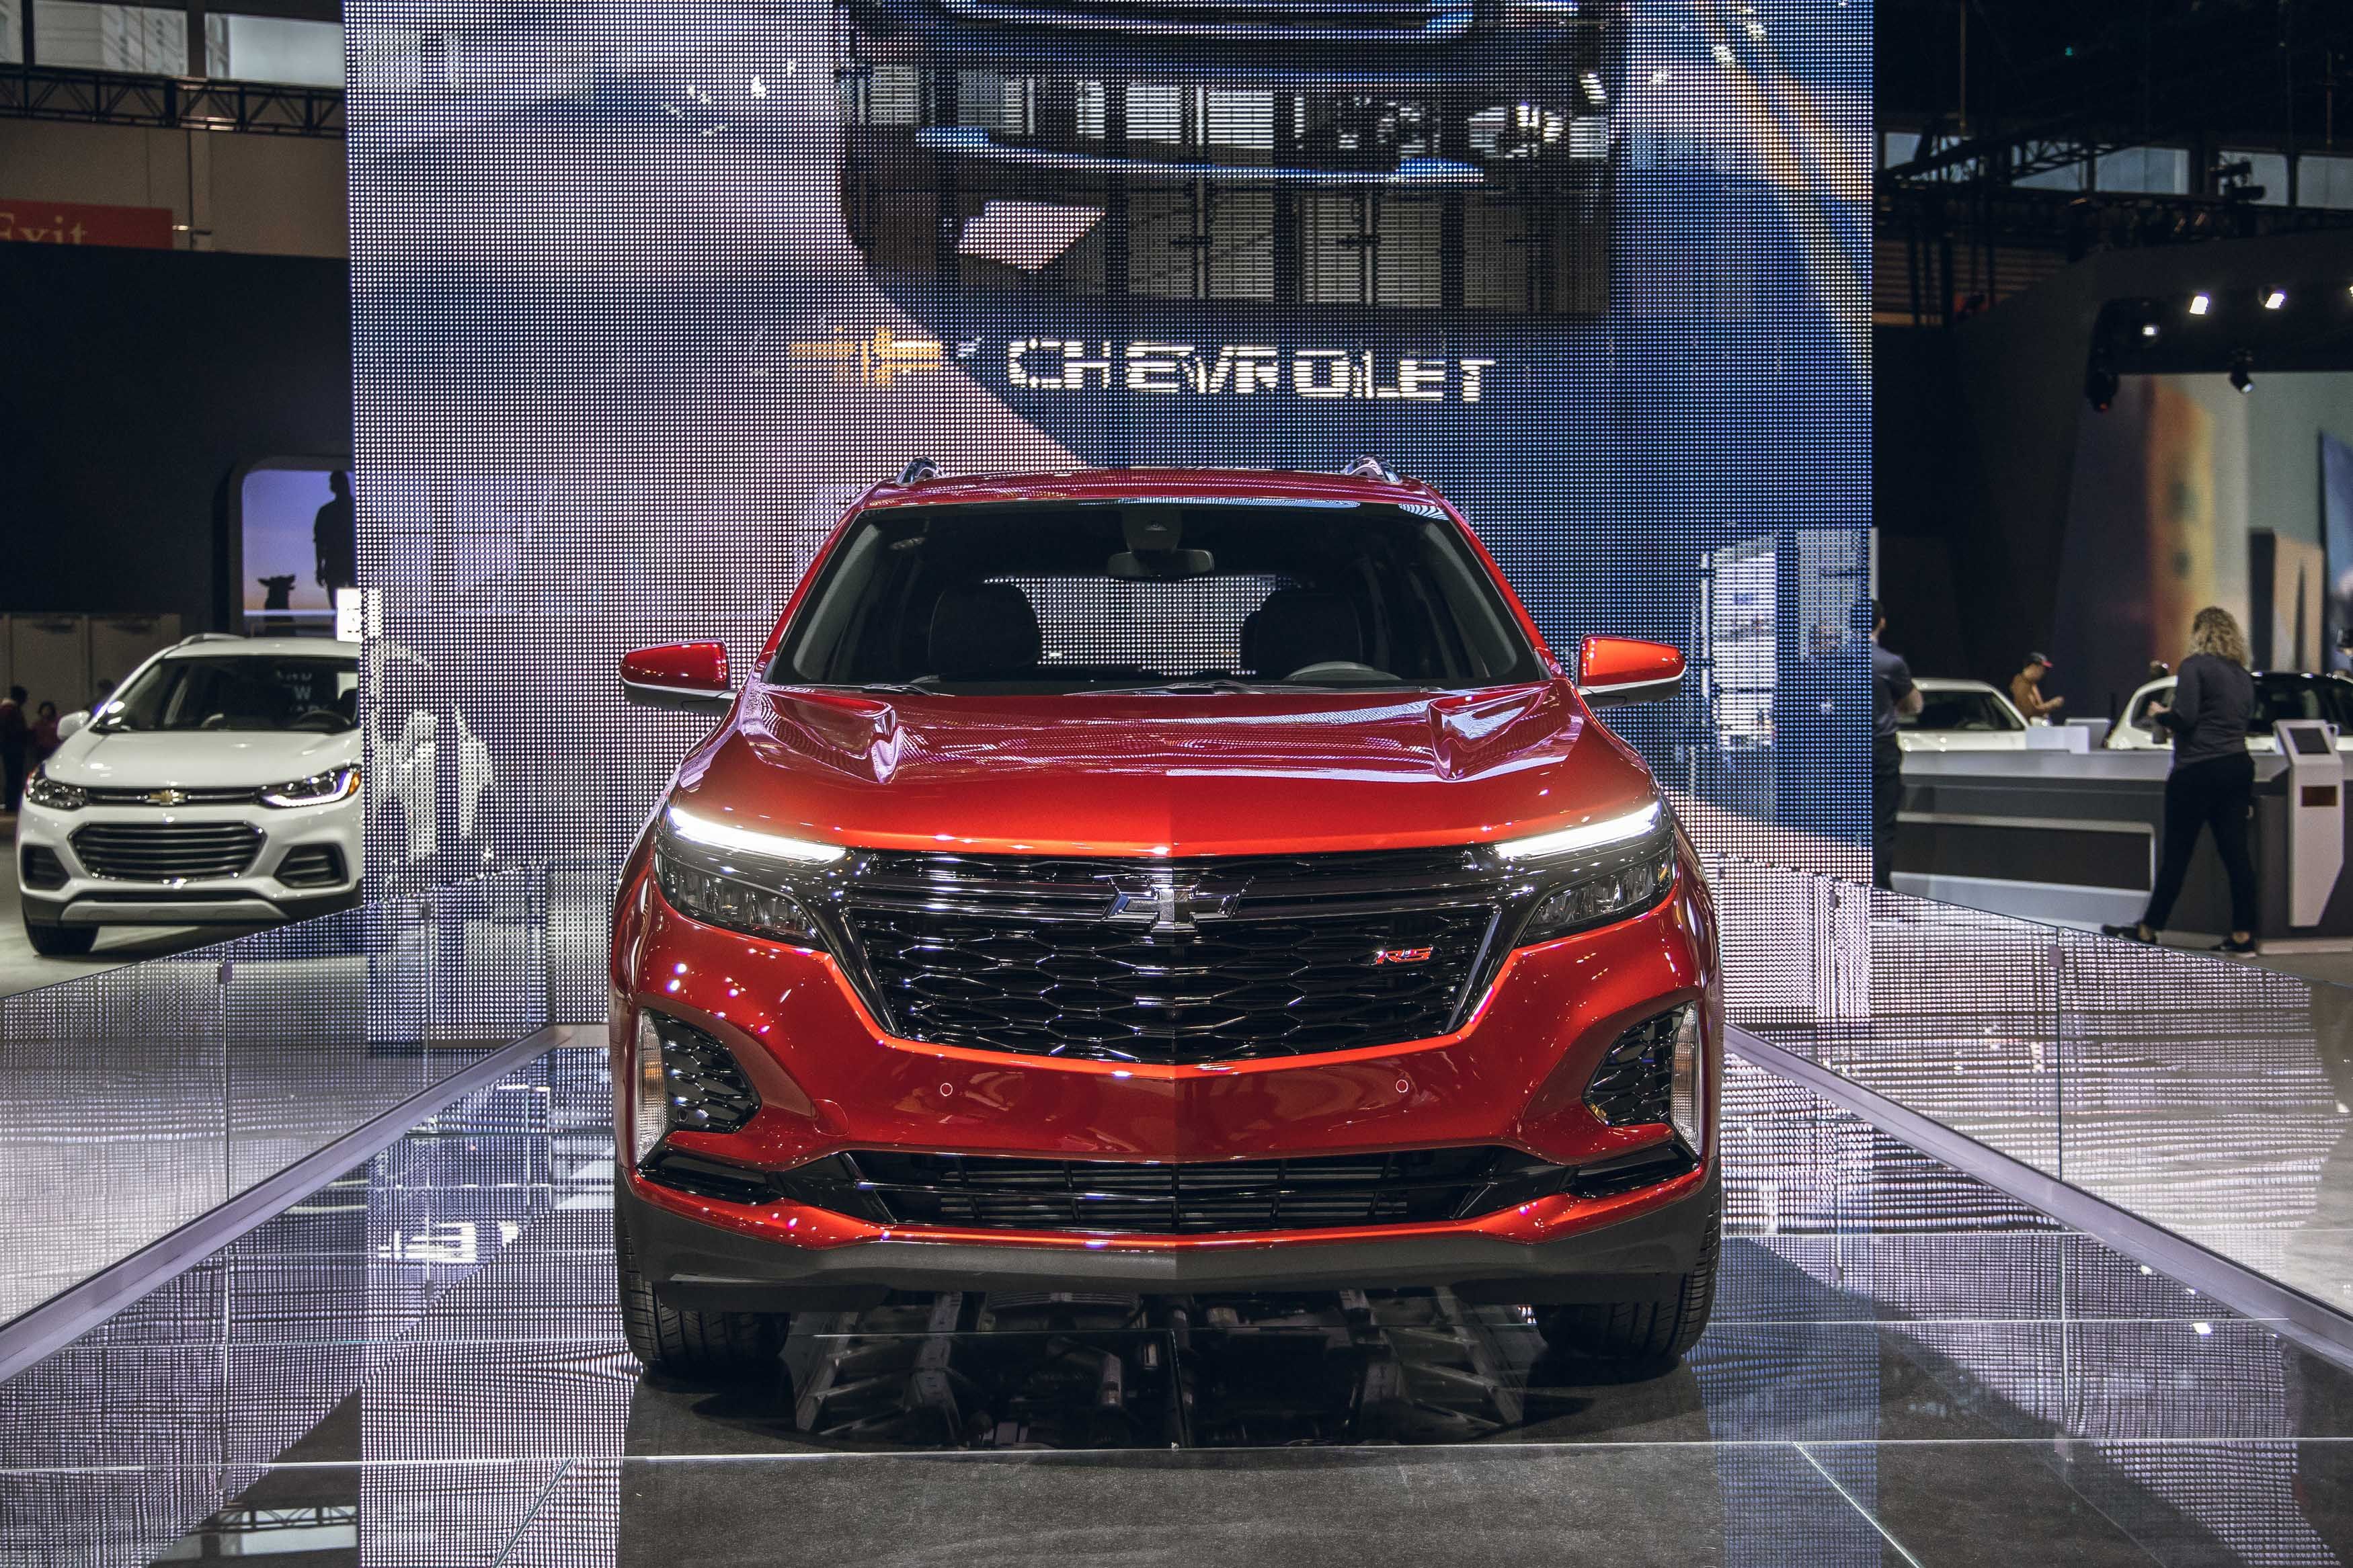 Comments on: Chevy's Popular Equinox Gets RS Trim, Updated Appearance